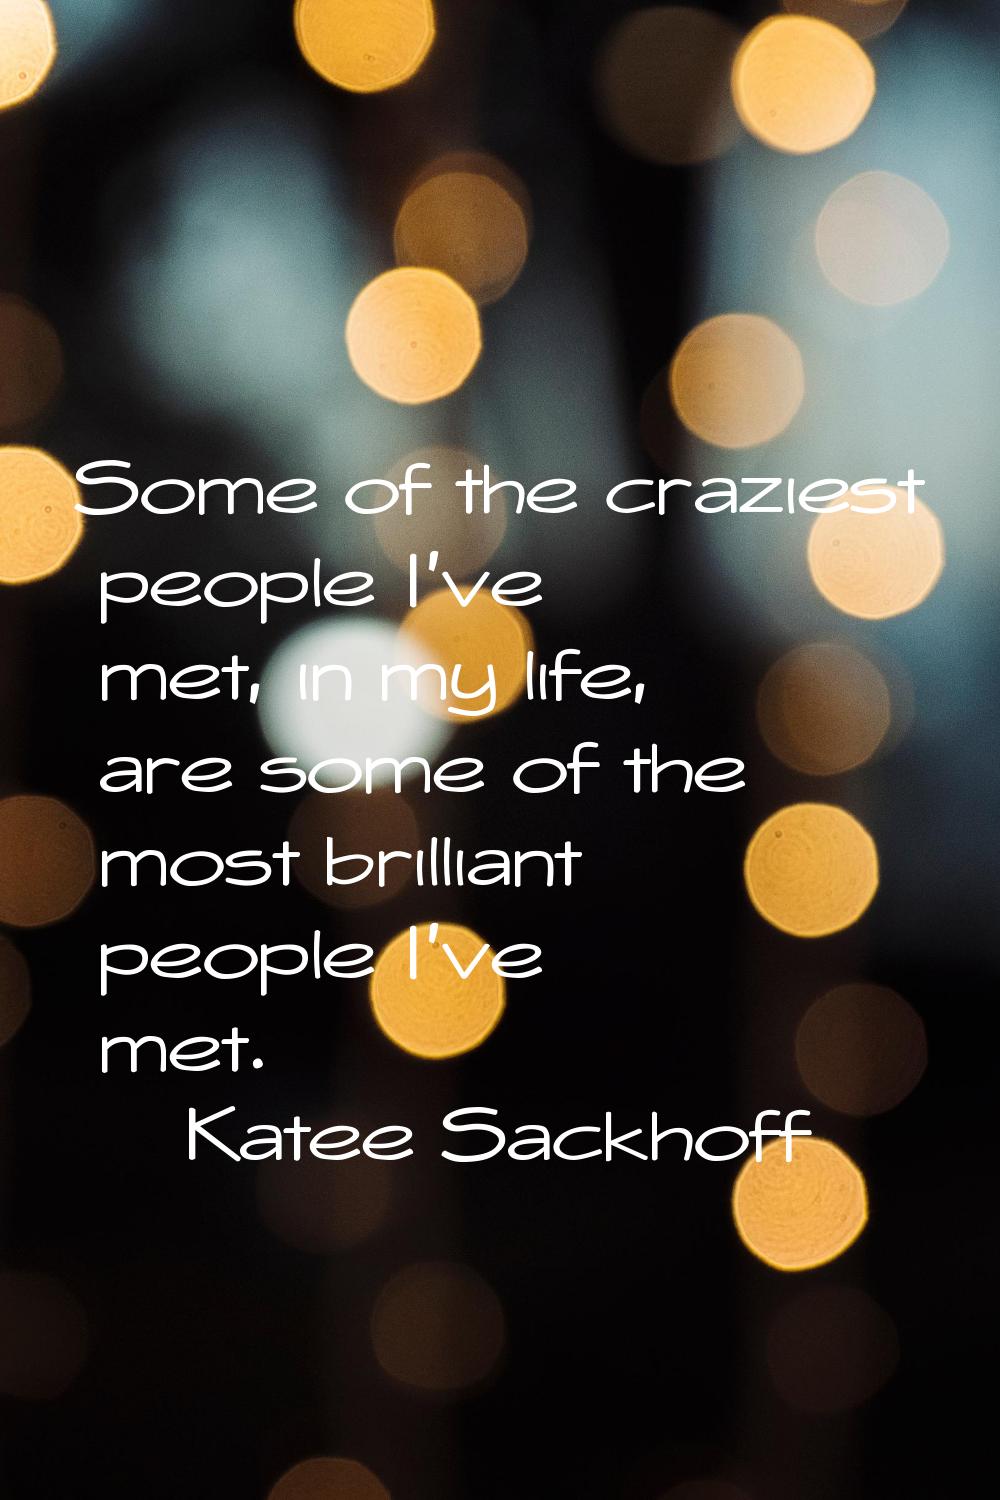 Some of the craziest people I've met, in my life, are some of the most brilliant people I've met.